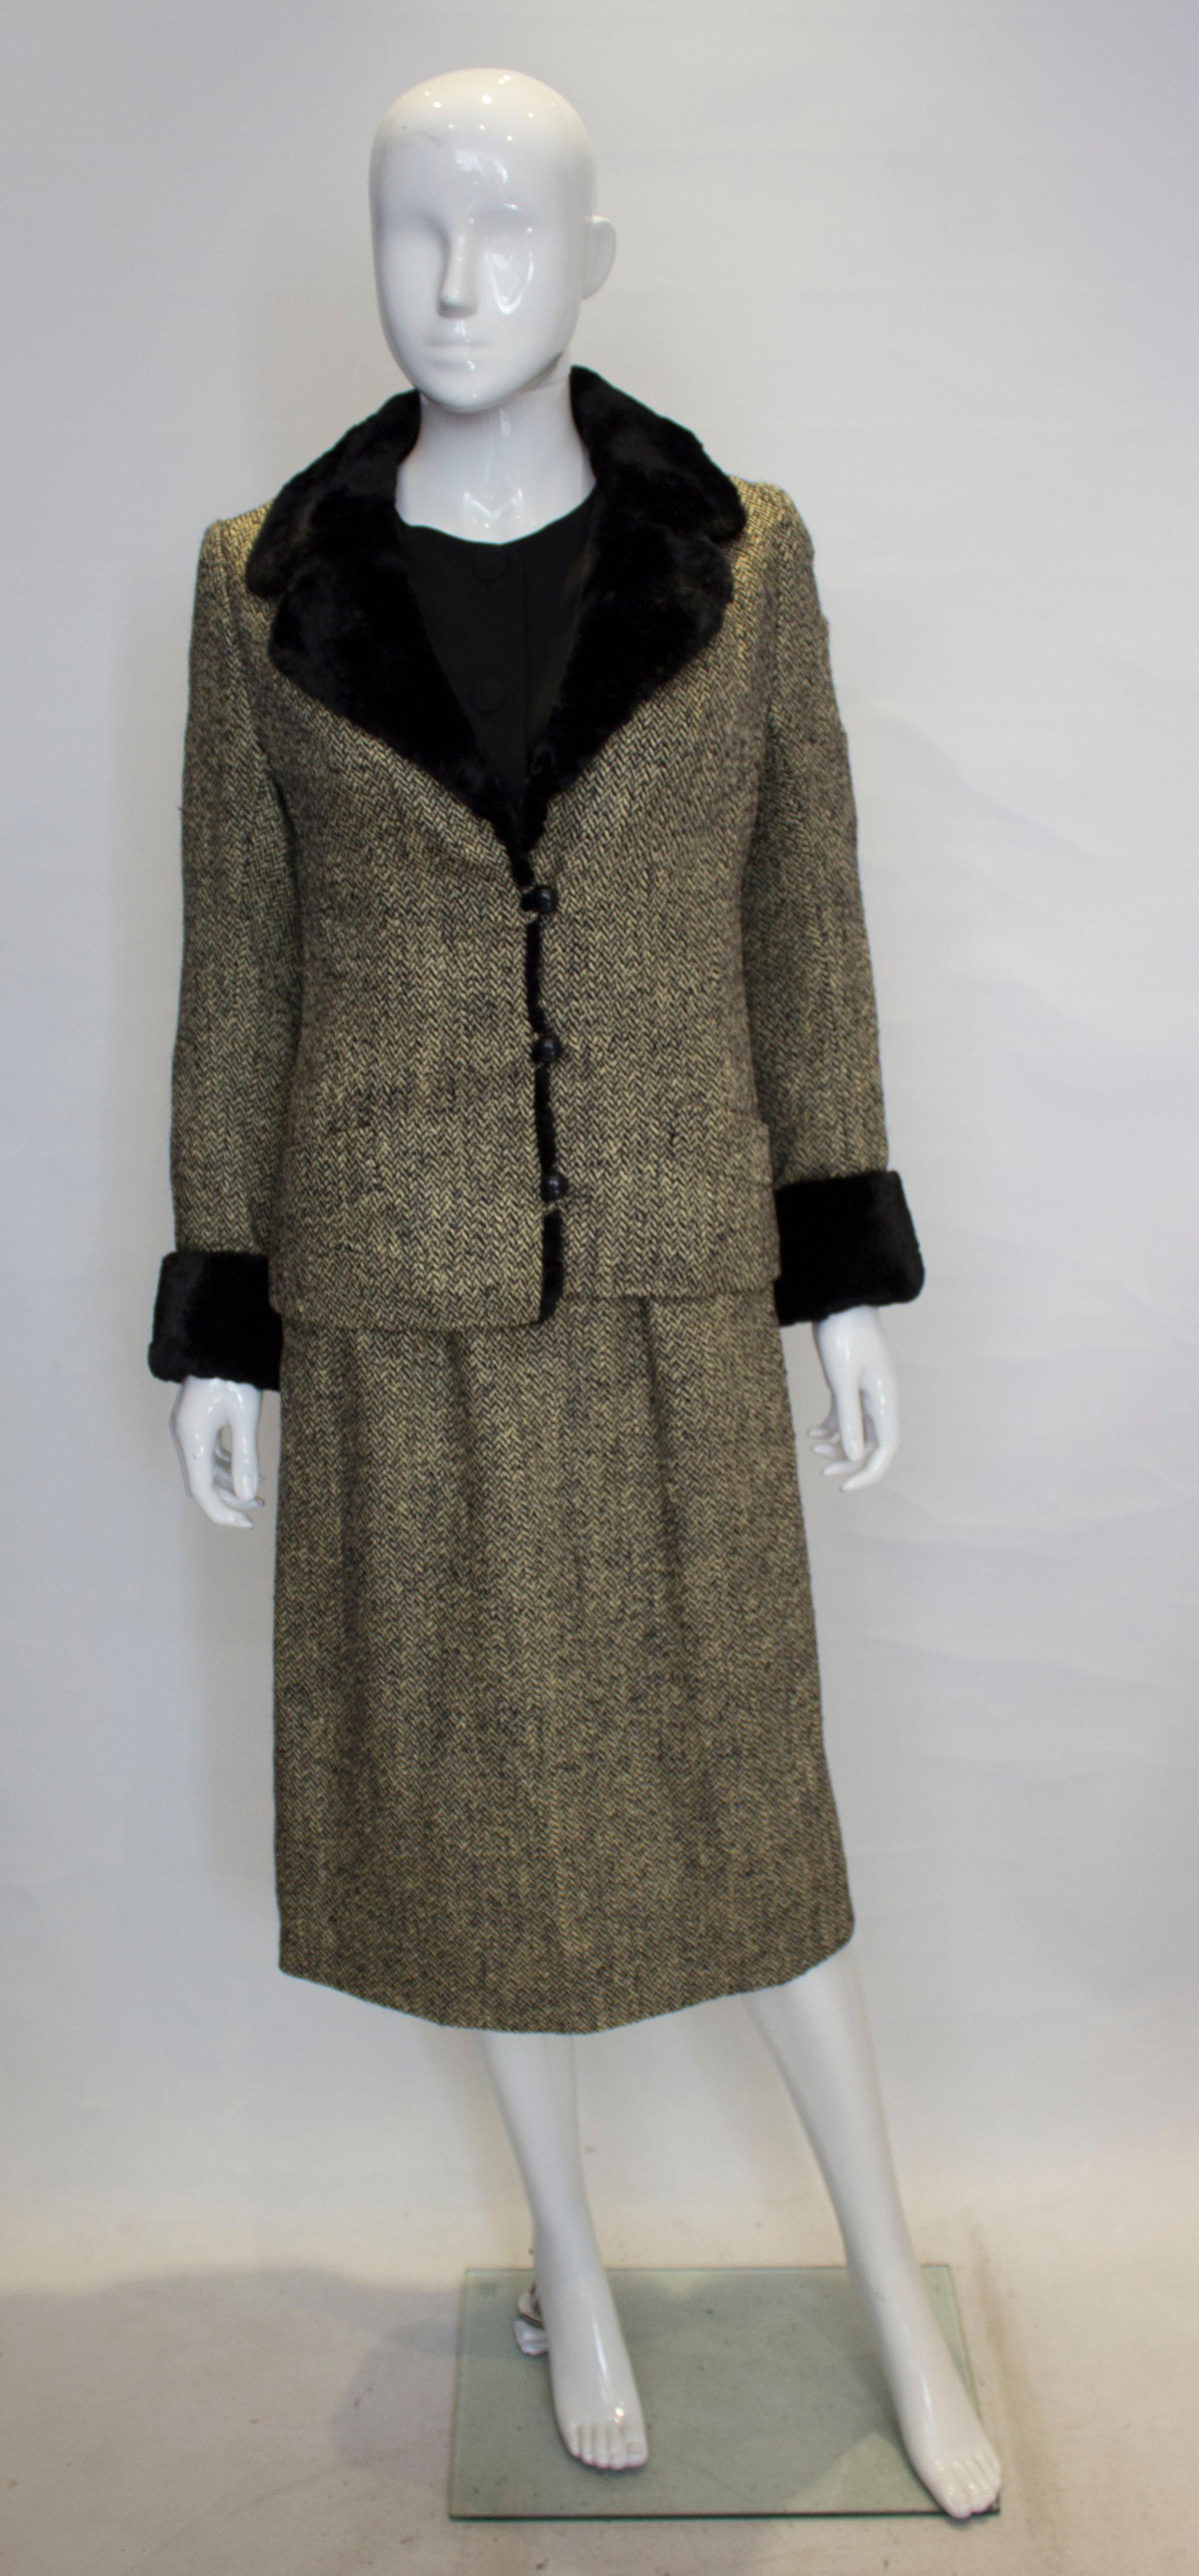 A chic dress and jacket by Hartnell. The dress has a black crepe like bodice with the lower area in a silk like tweed. The dress has four decorative buttons on the front, two pockets at the front, long sleeves with popper fastenings, a central back